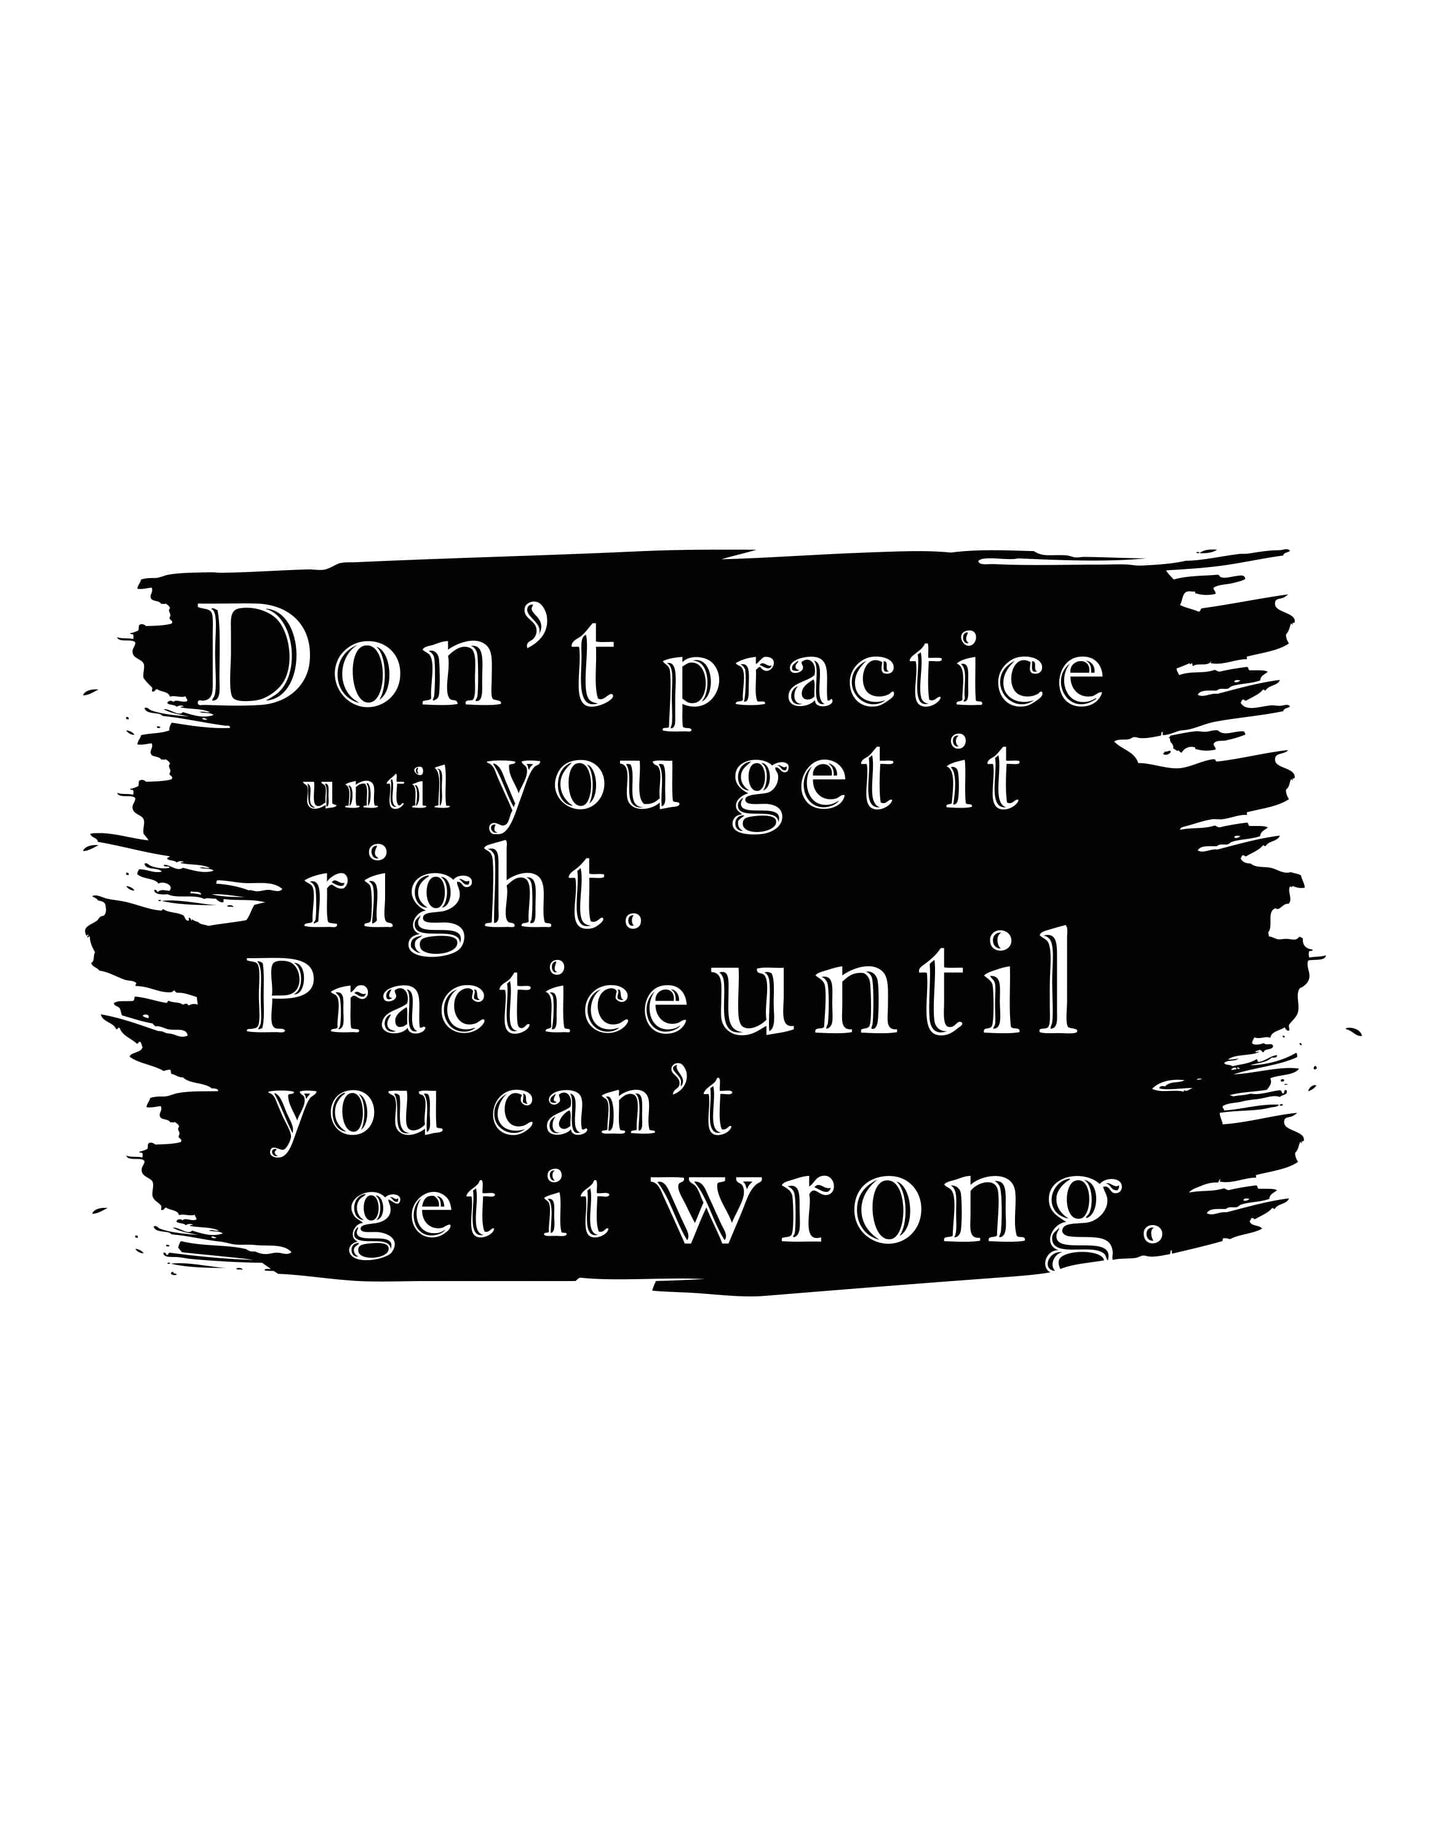 Motivational Quote Vinyl Wall Decal Sticker. Don't Practice Until You Get it Right. Practice Until You Can't Get it Wrong. #5187